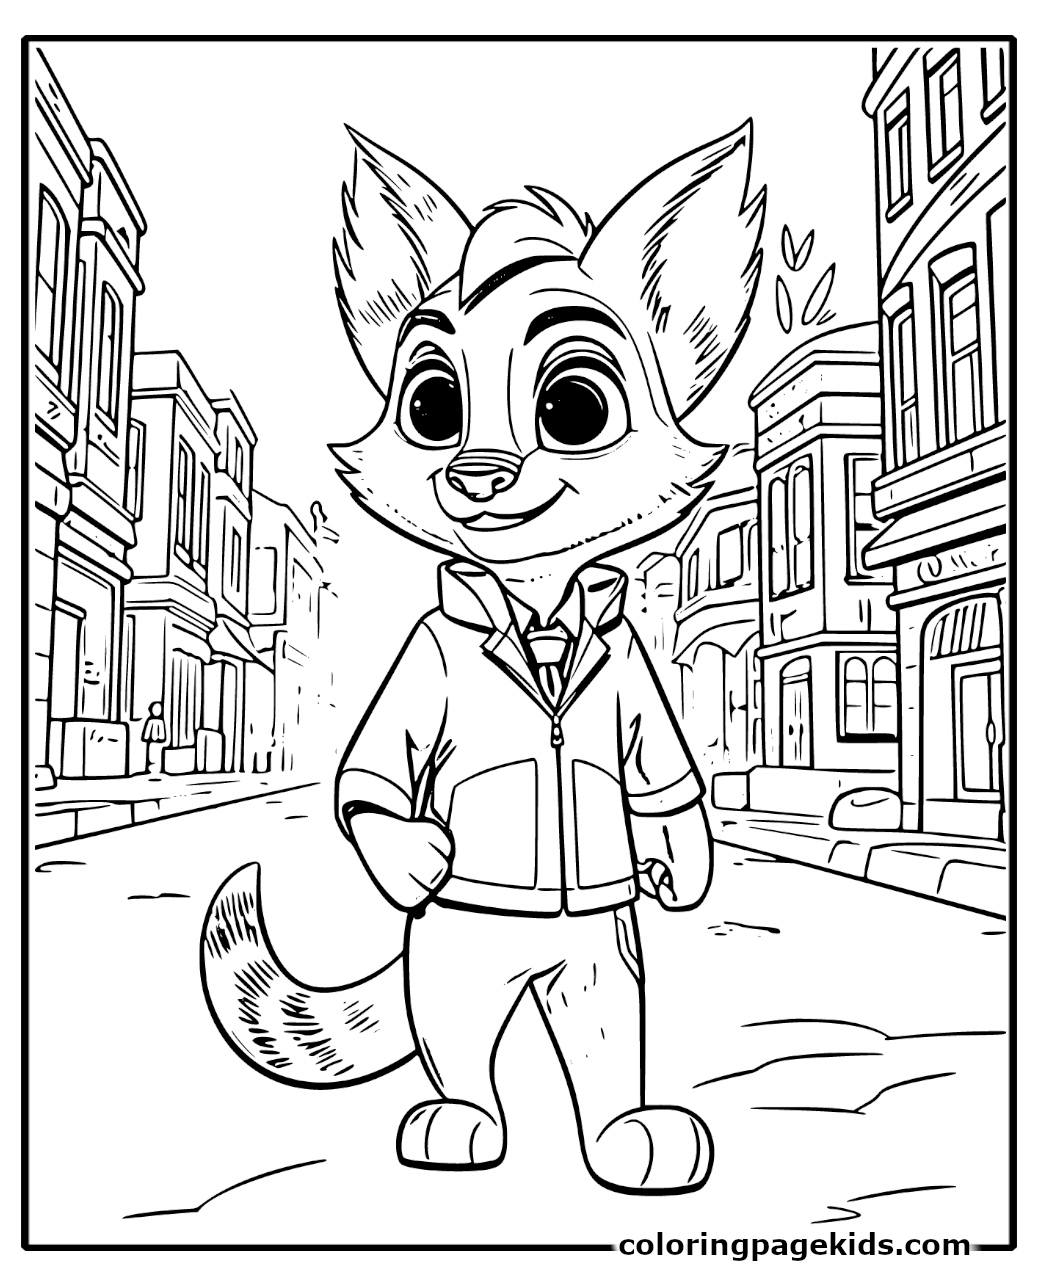 Free Printable Zootopia Coloring Pages For Kids